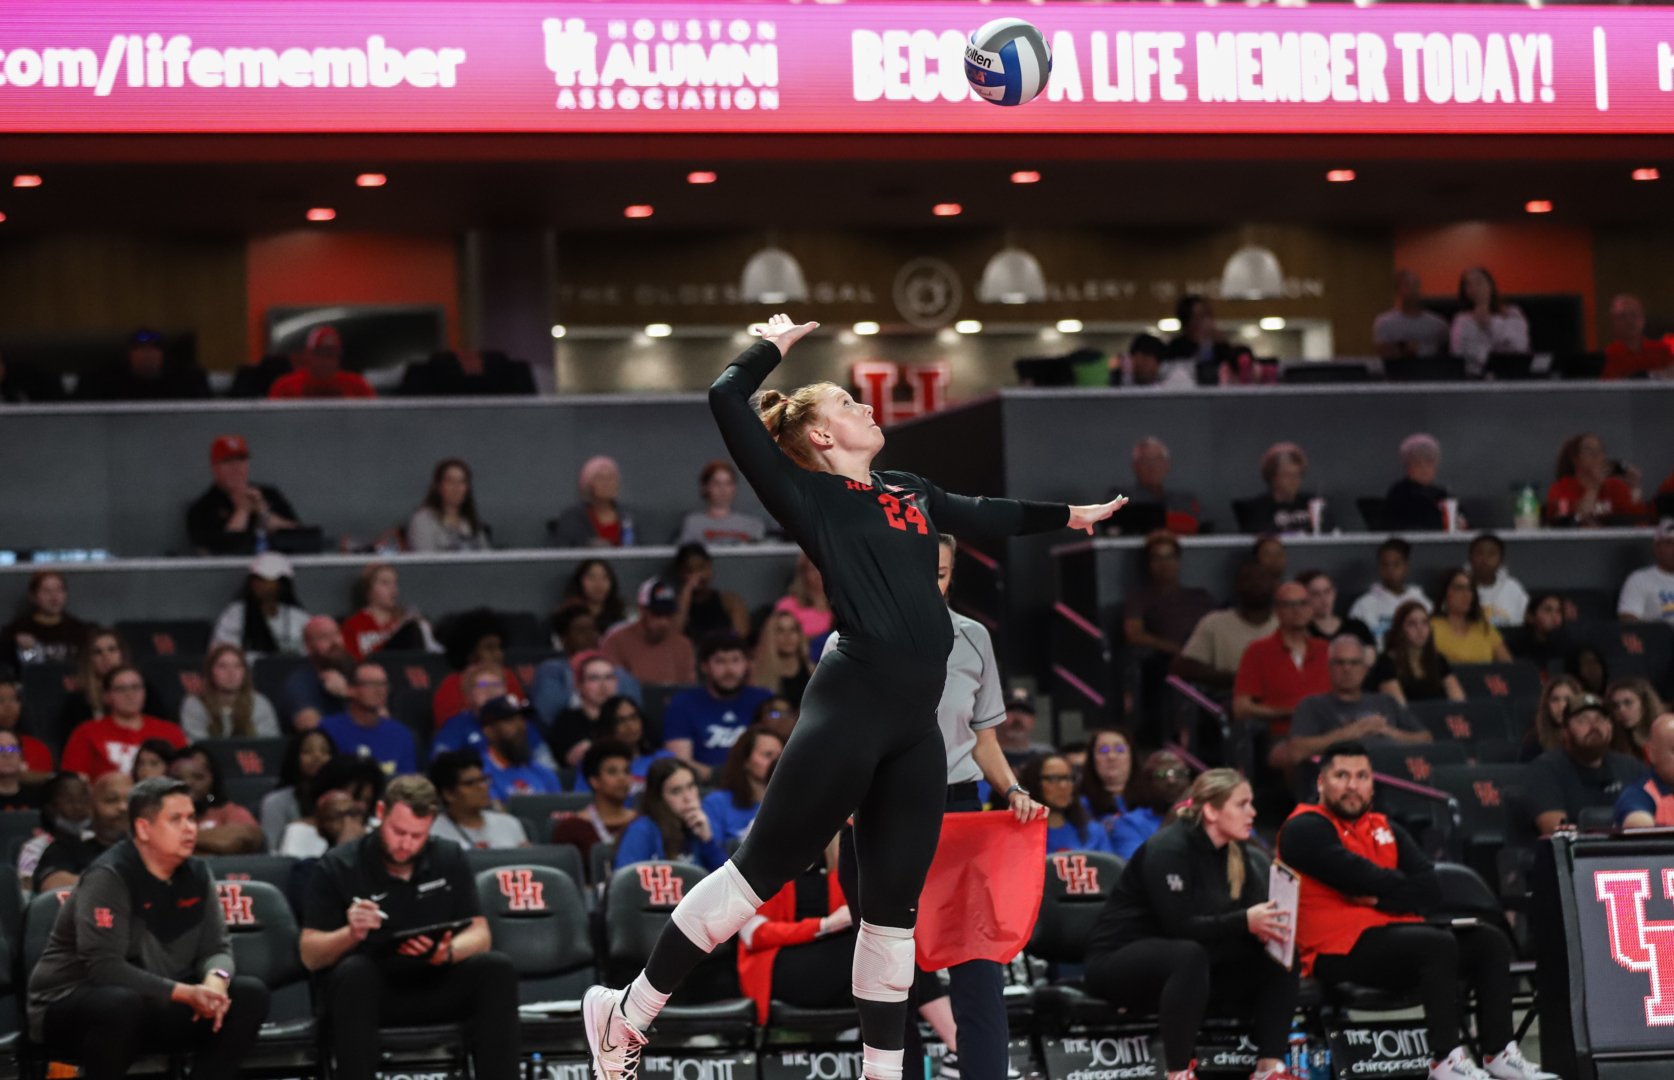 Senior outsider hitter Abbie Jackson became the all-time leader in aces in UH volleyball program history in the Cougars' victory over Cincinnati. | Sean Thomas/The Cougar